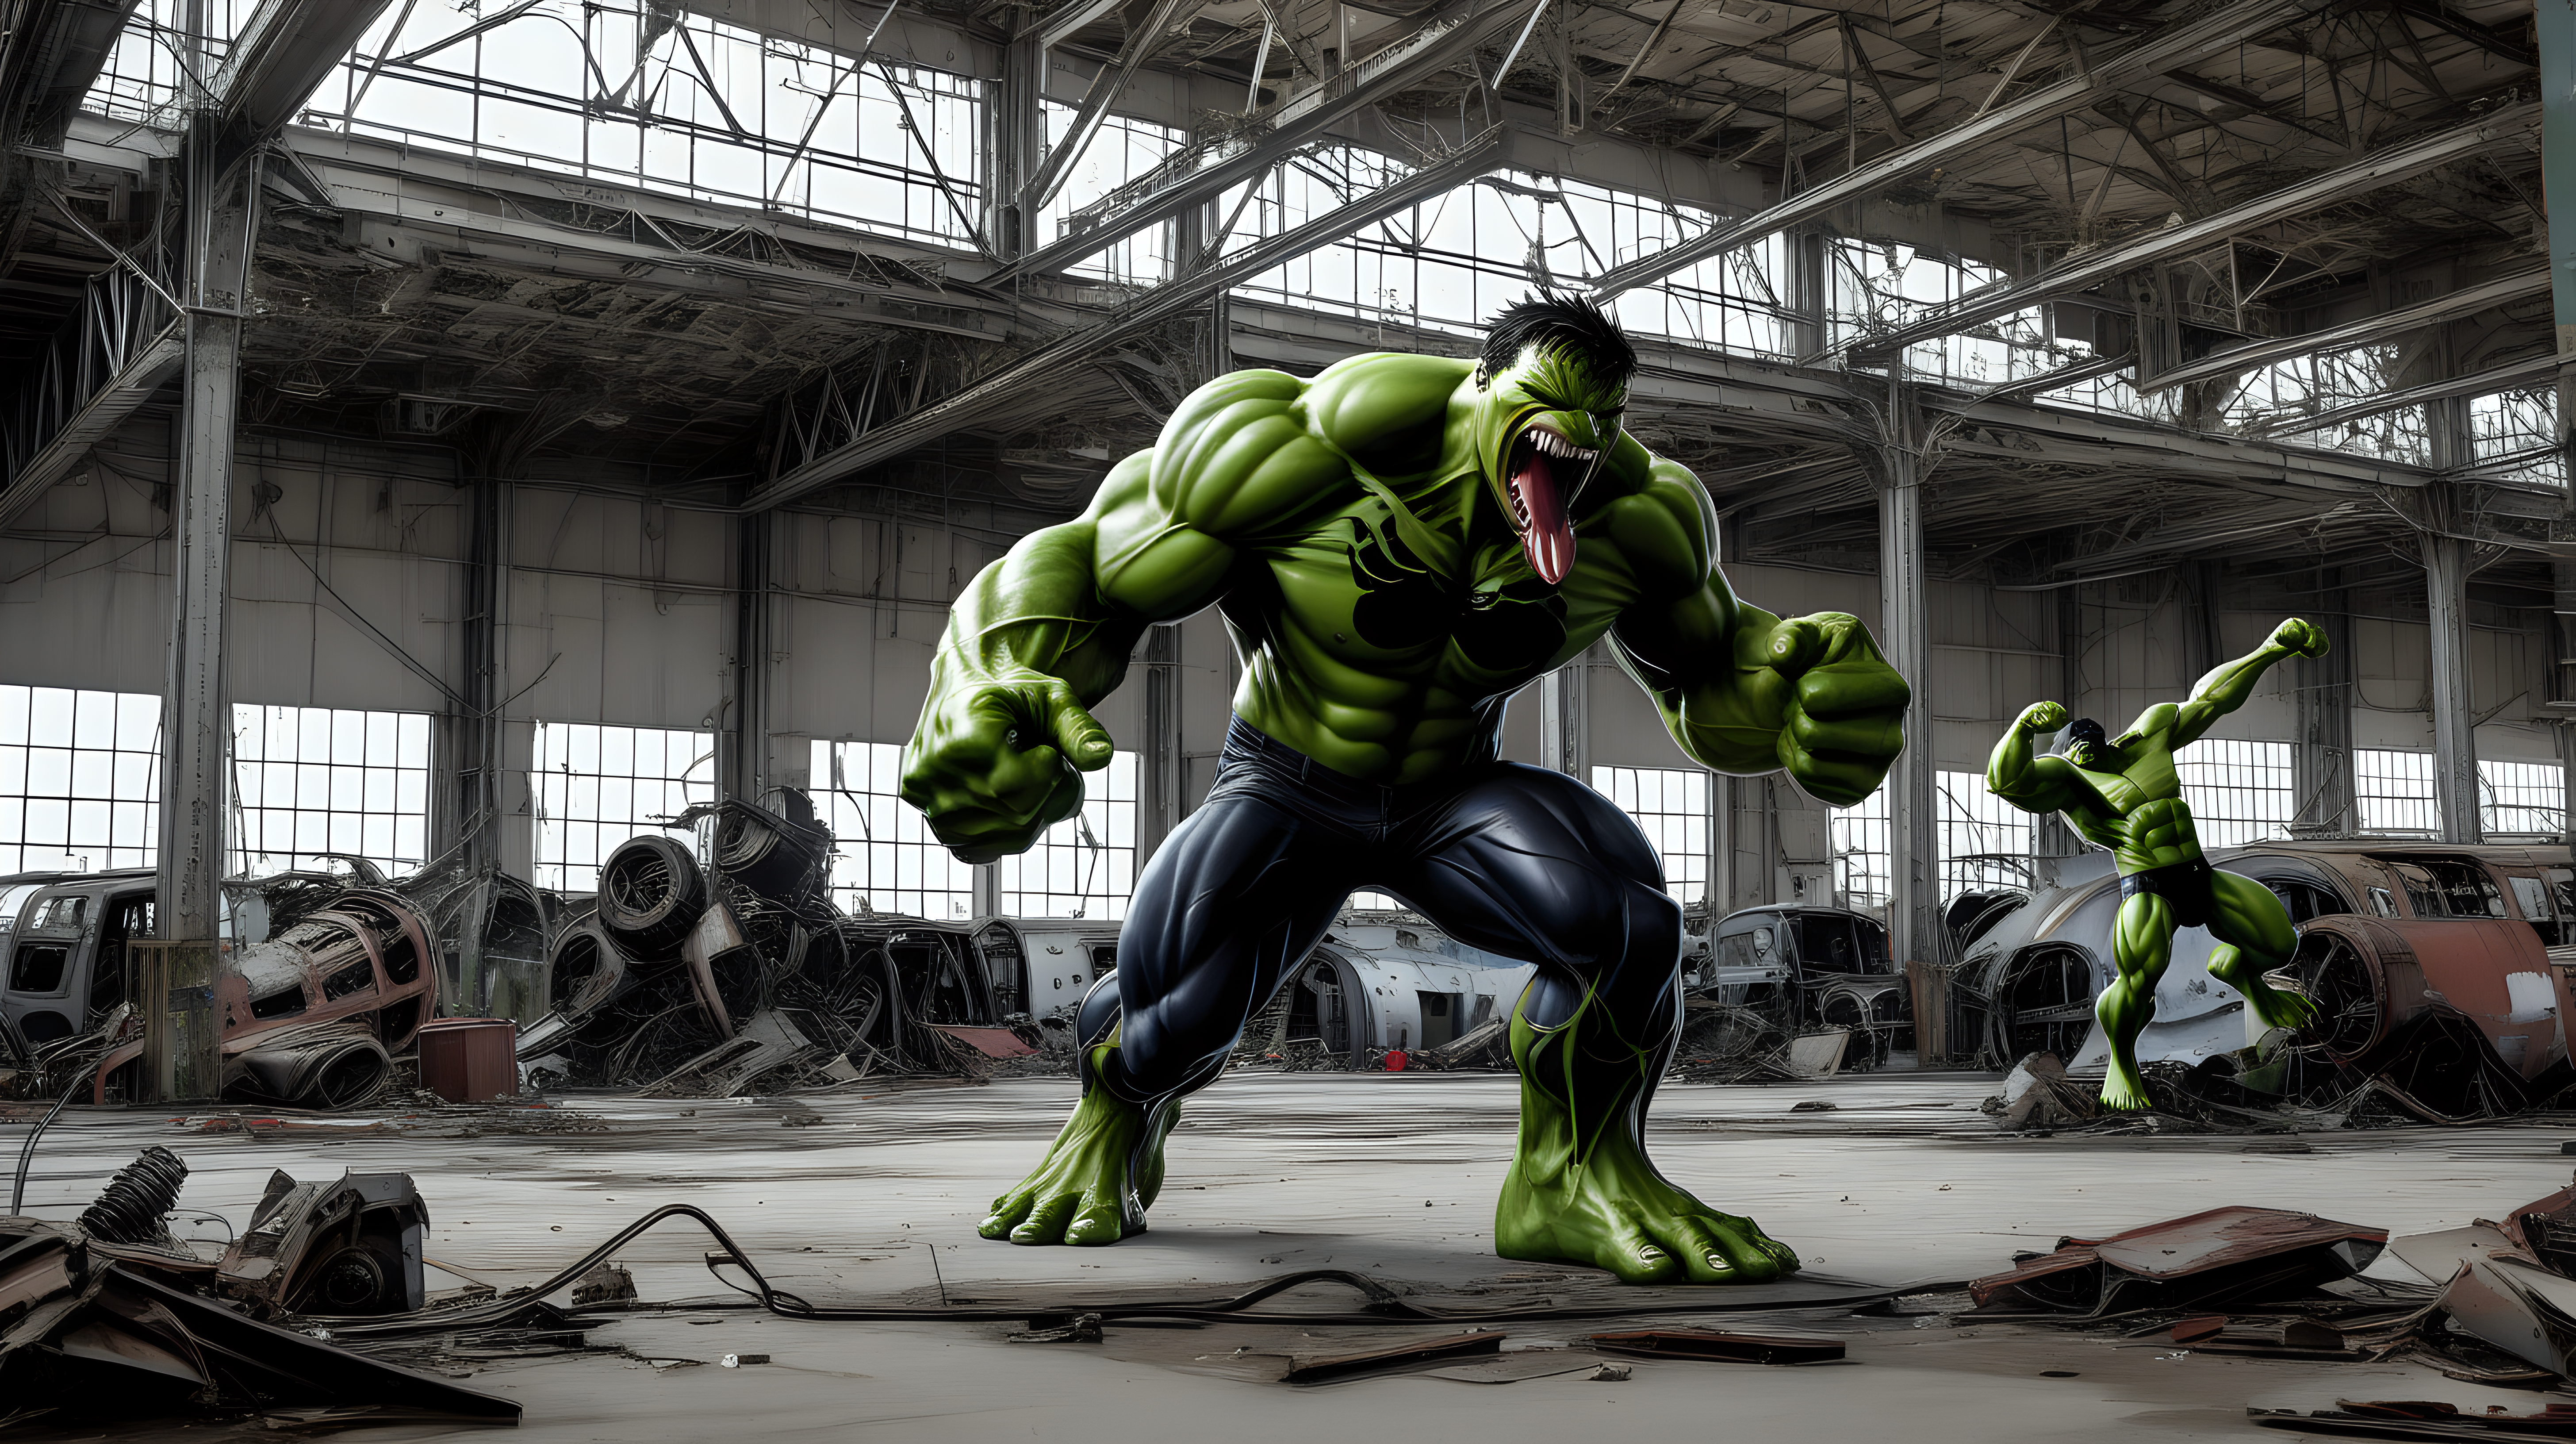 Venom fights the hulk in an abandon airplane factory